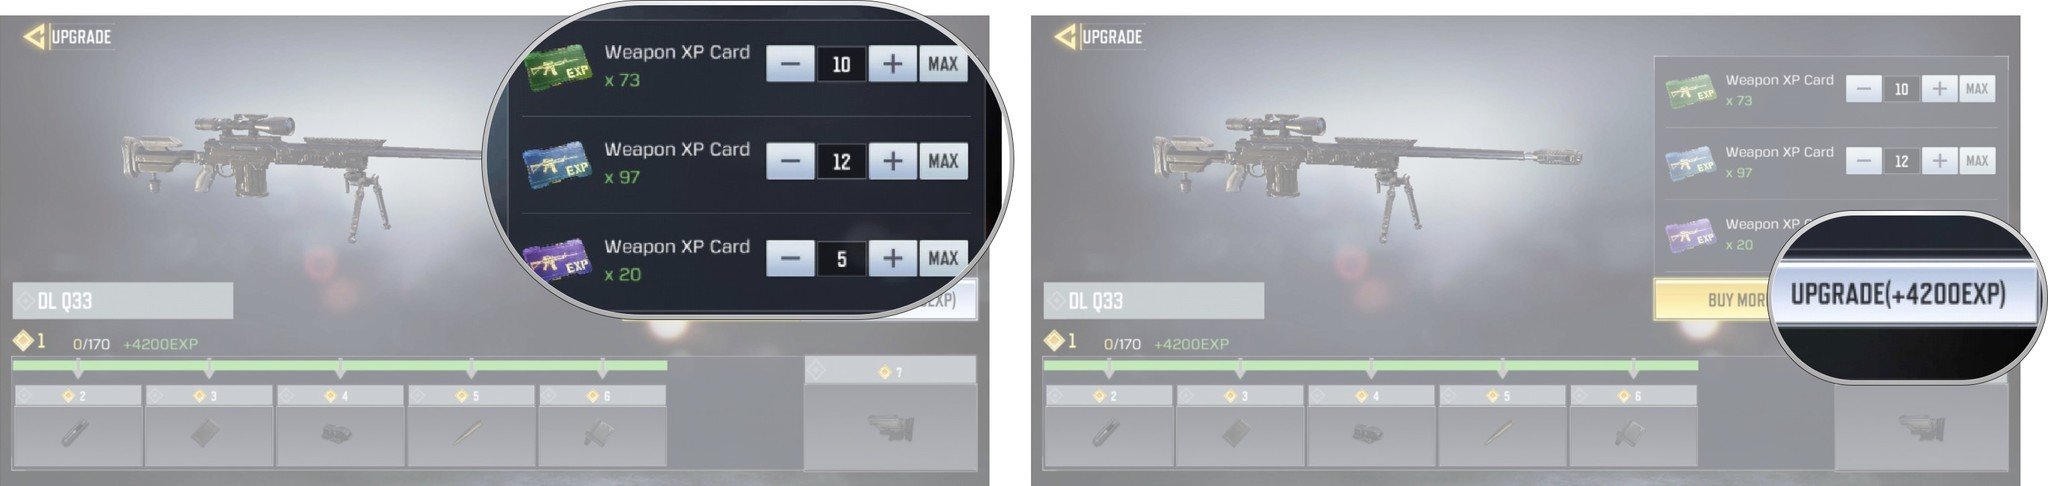 cod mobile weapon upgrade